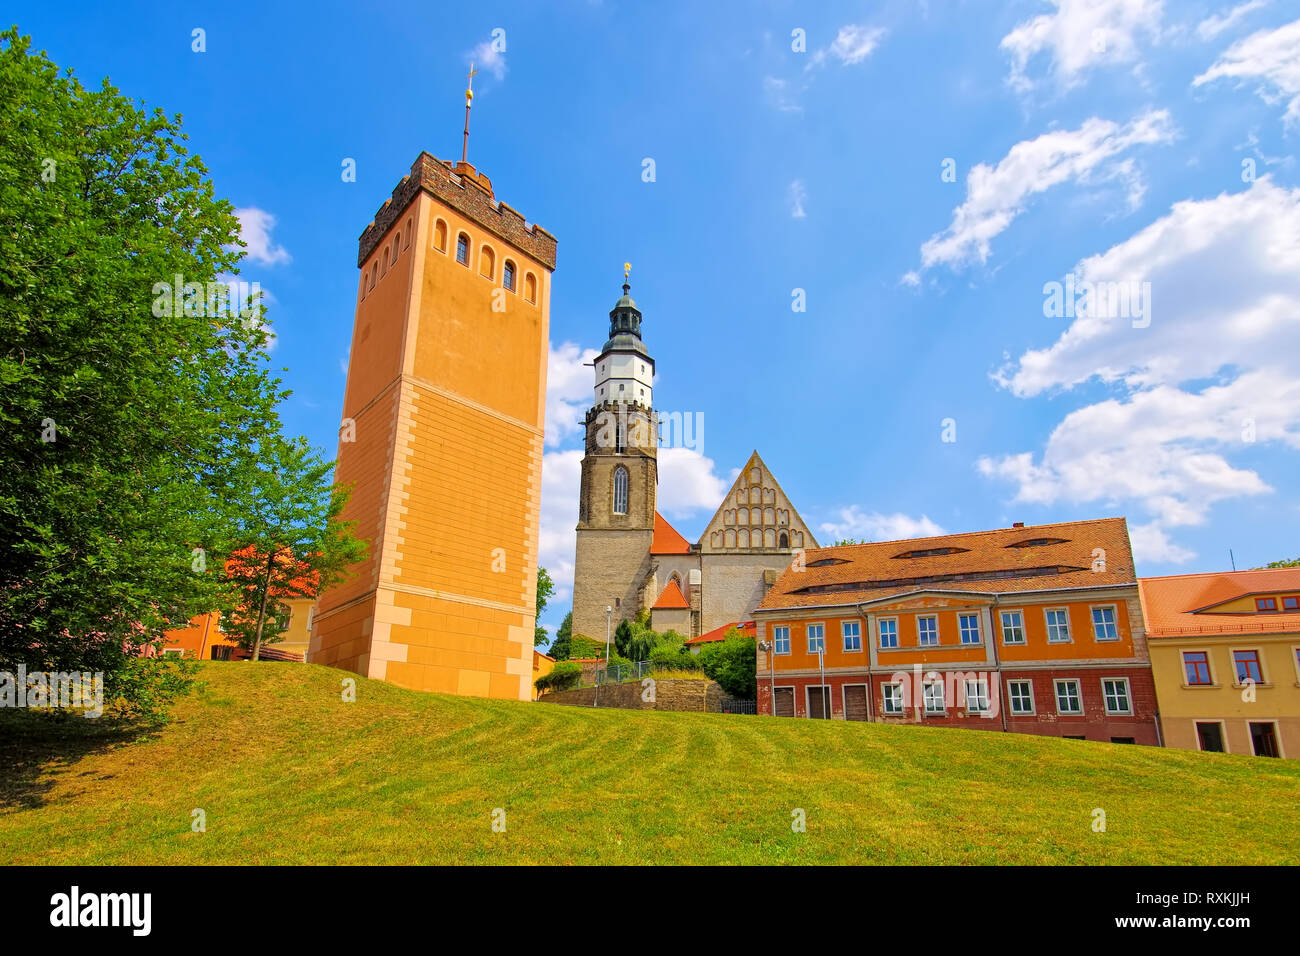 Kamenz red tower and church, Saxony in Germany Stock Photo